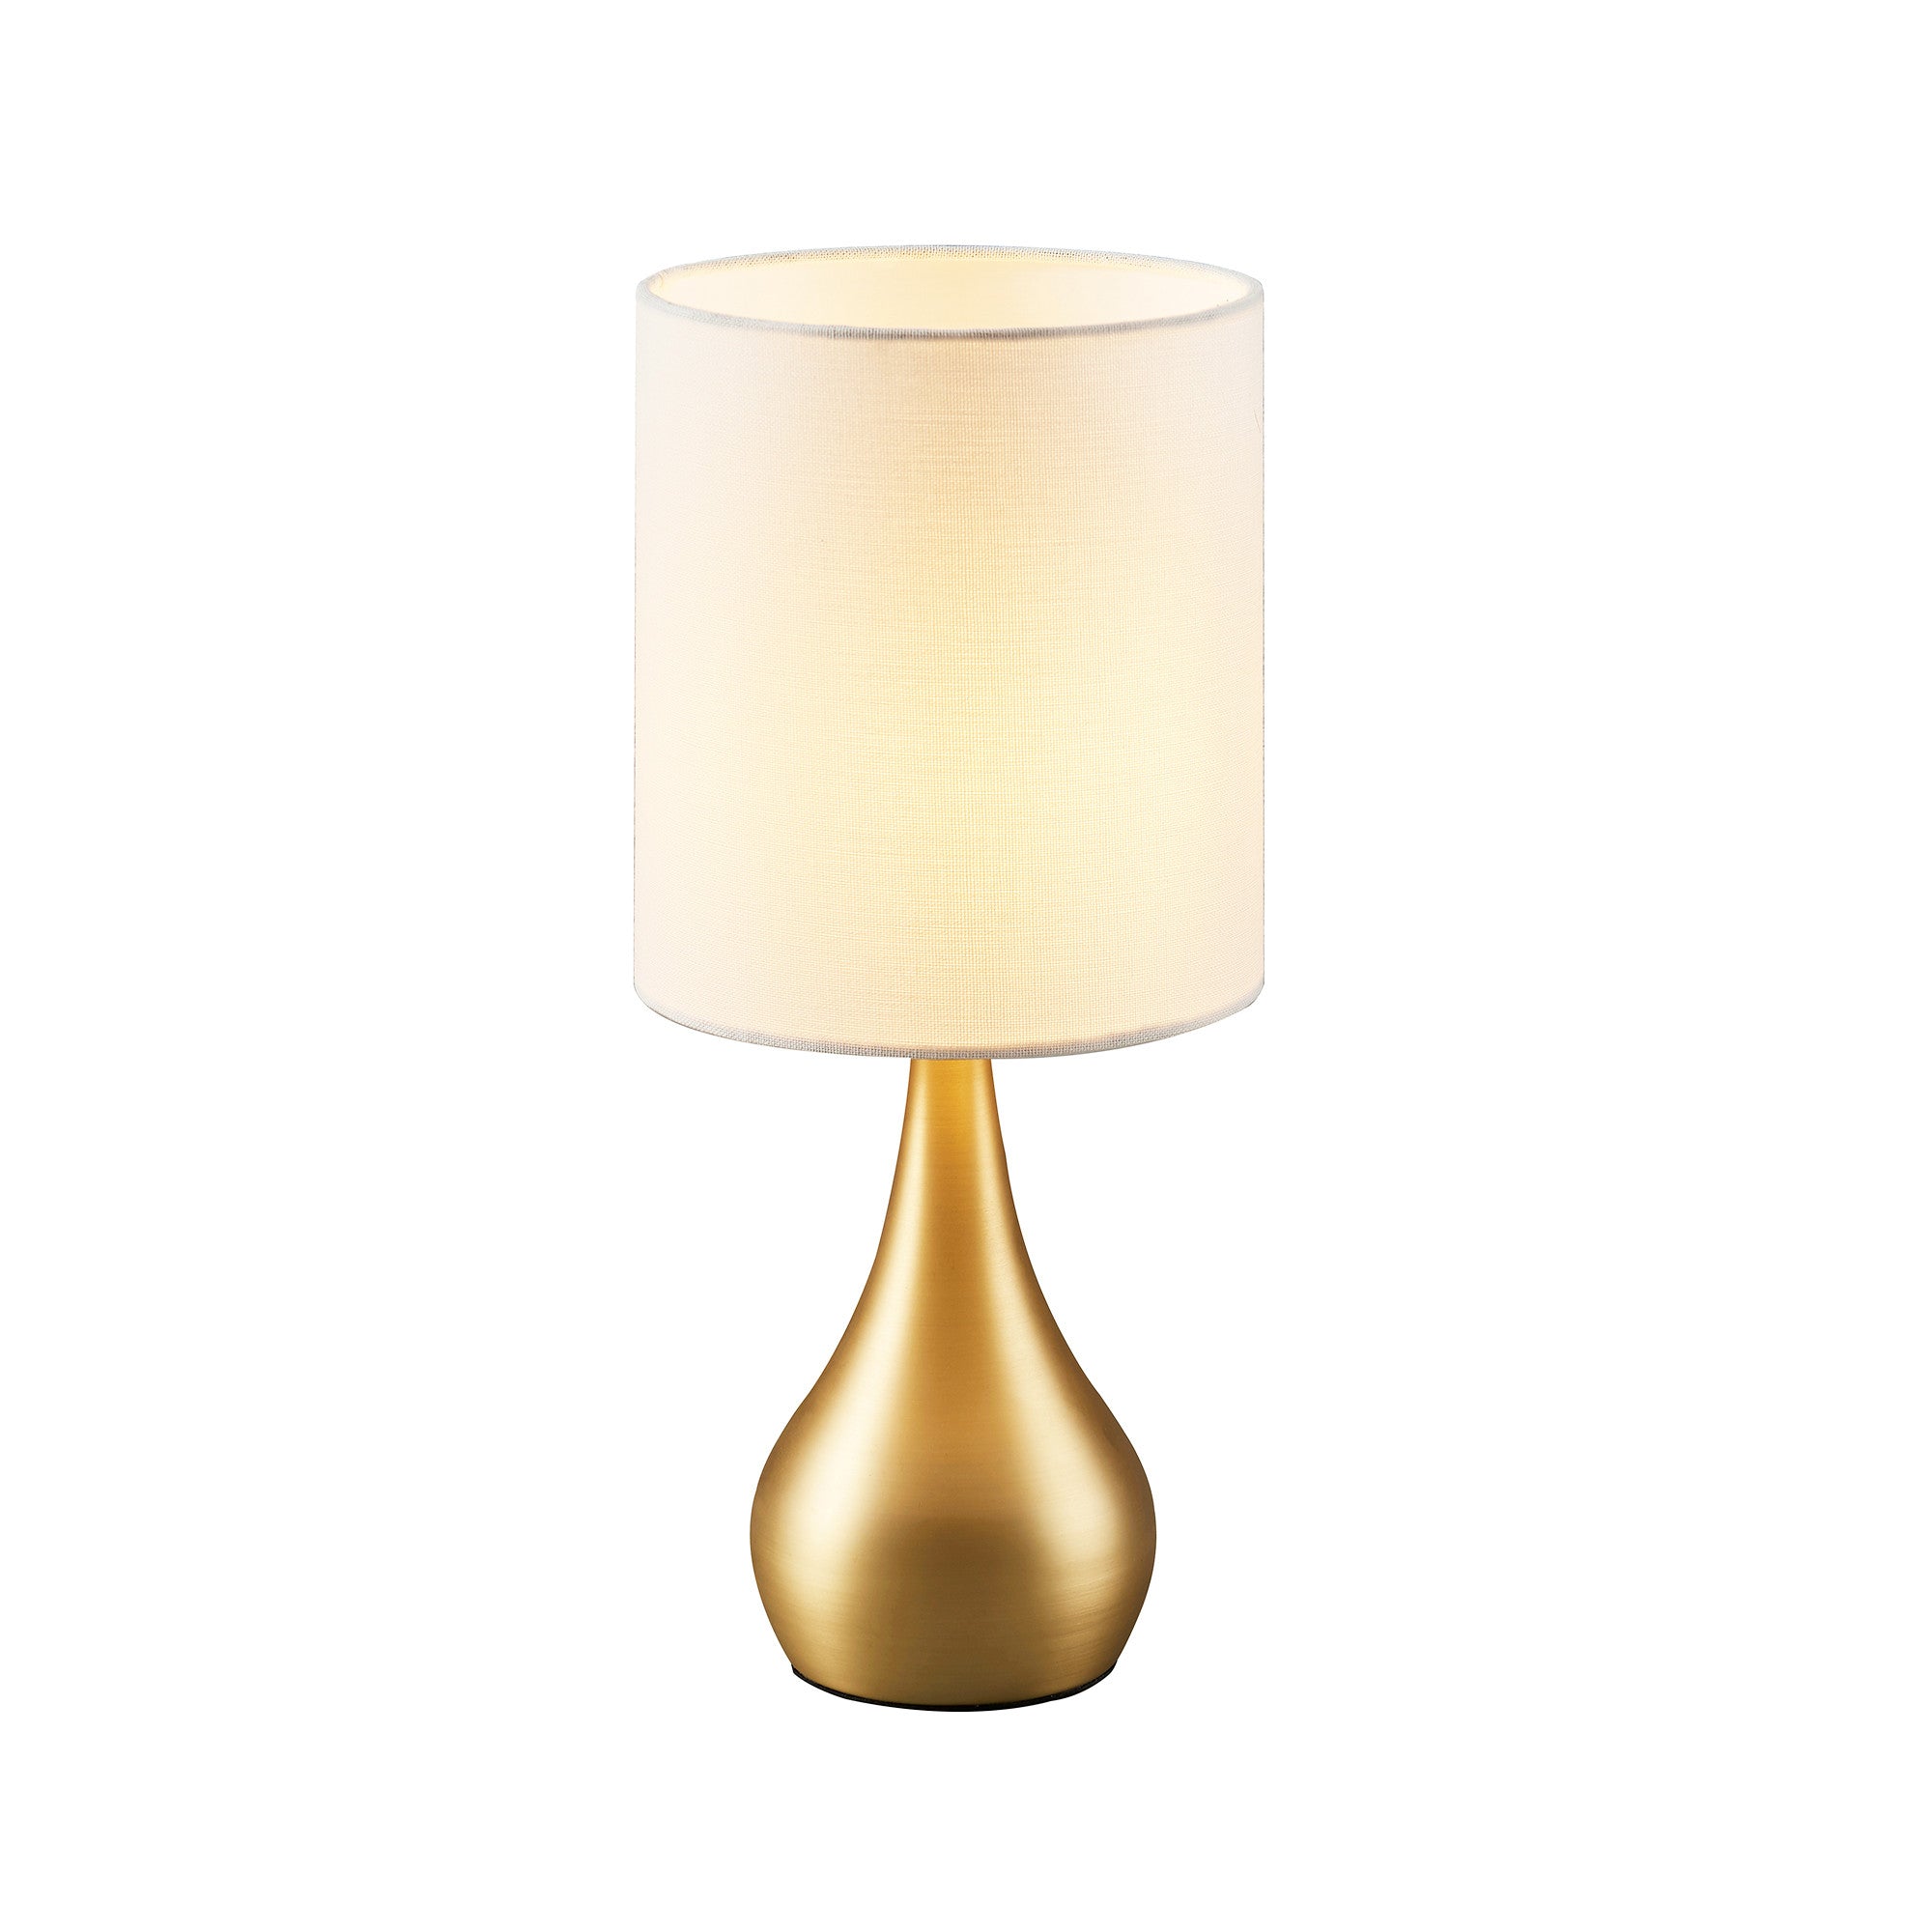 Teamson Home Sarah 15" Modern Metal Table Lamp with Touch Switch and Cream Shade, Polished Brass